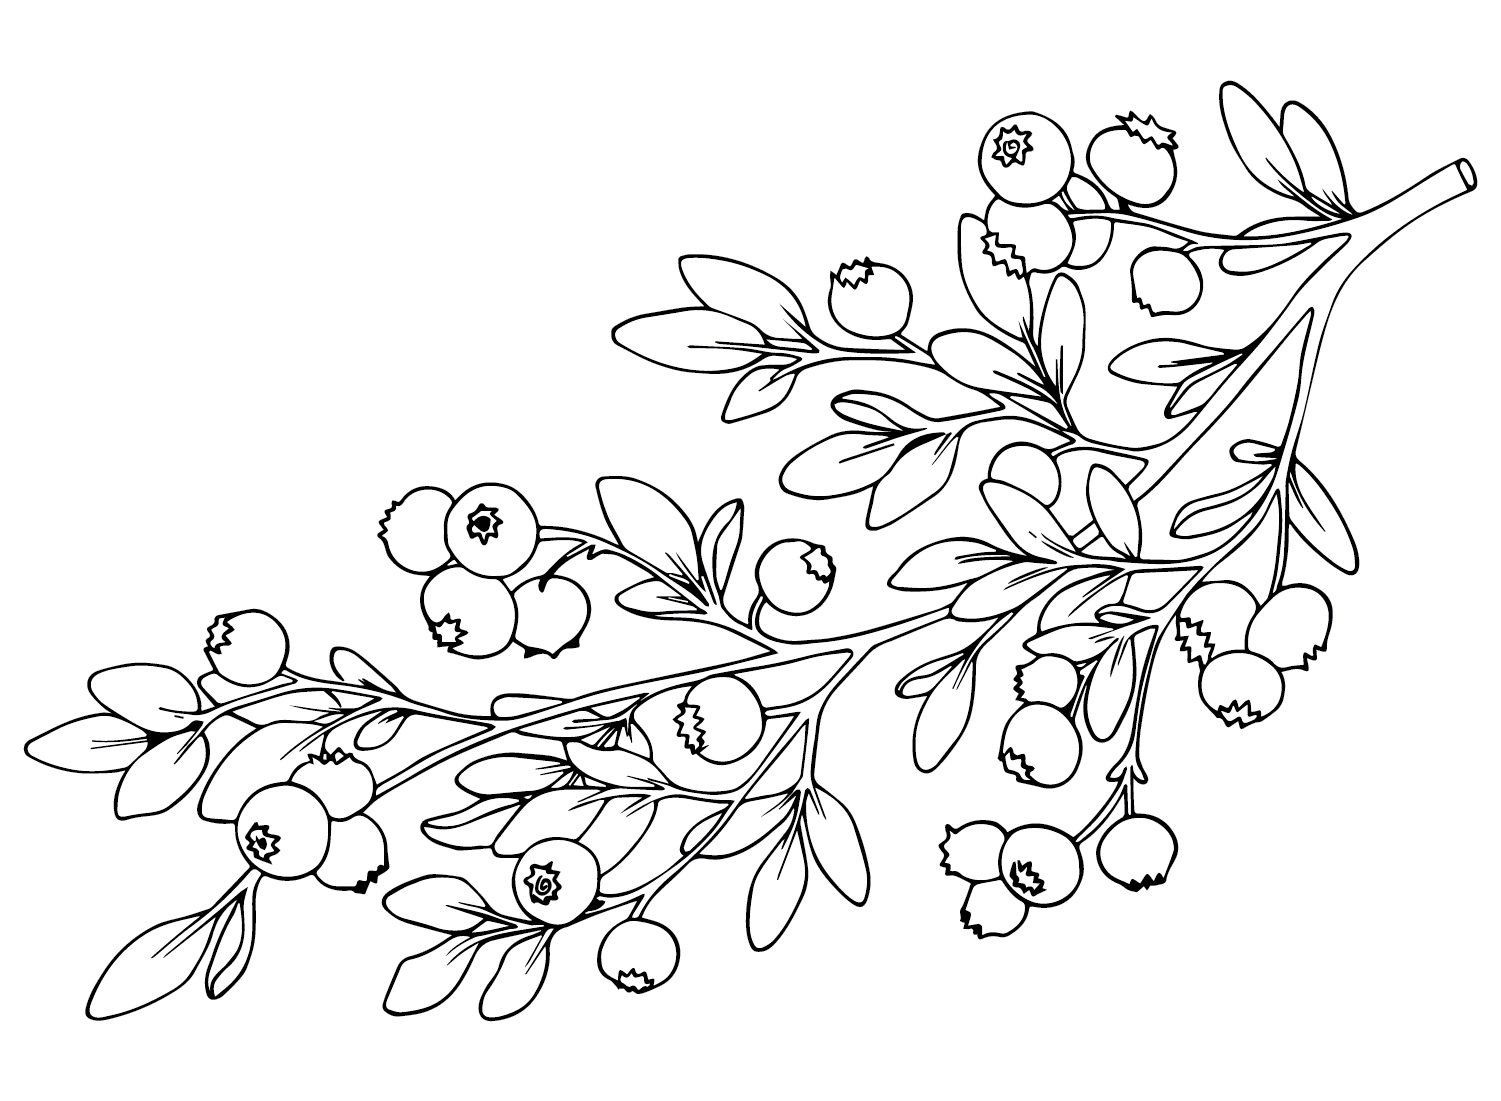 Branch Huckleberry Coloring Page